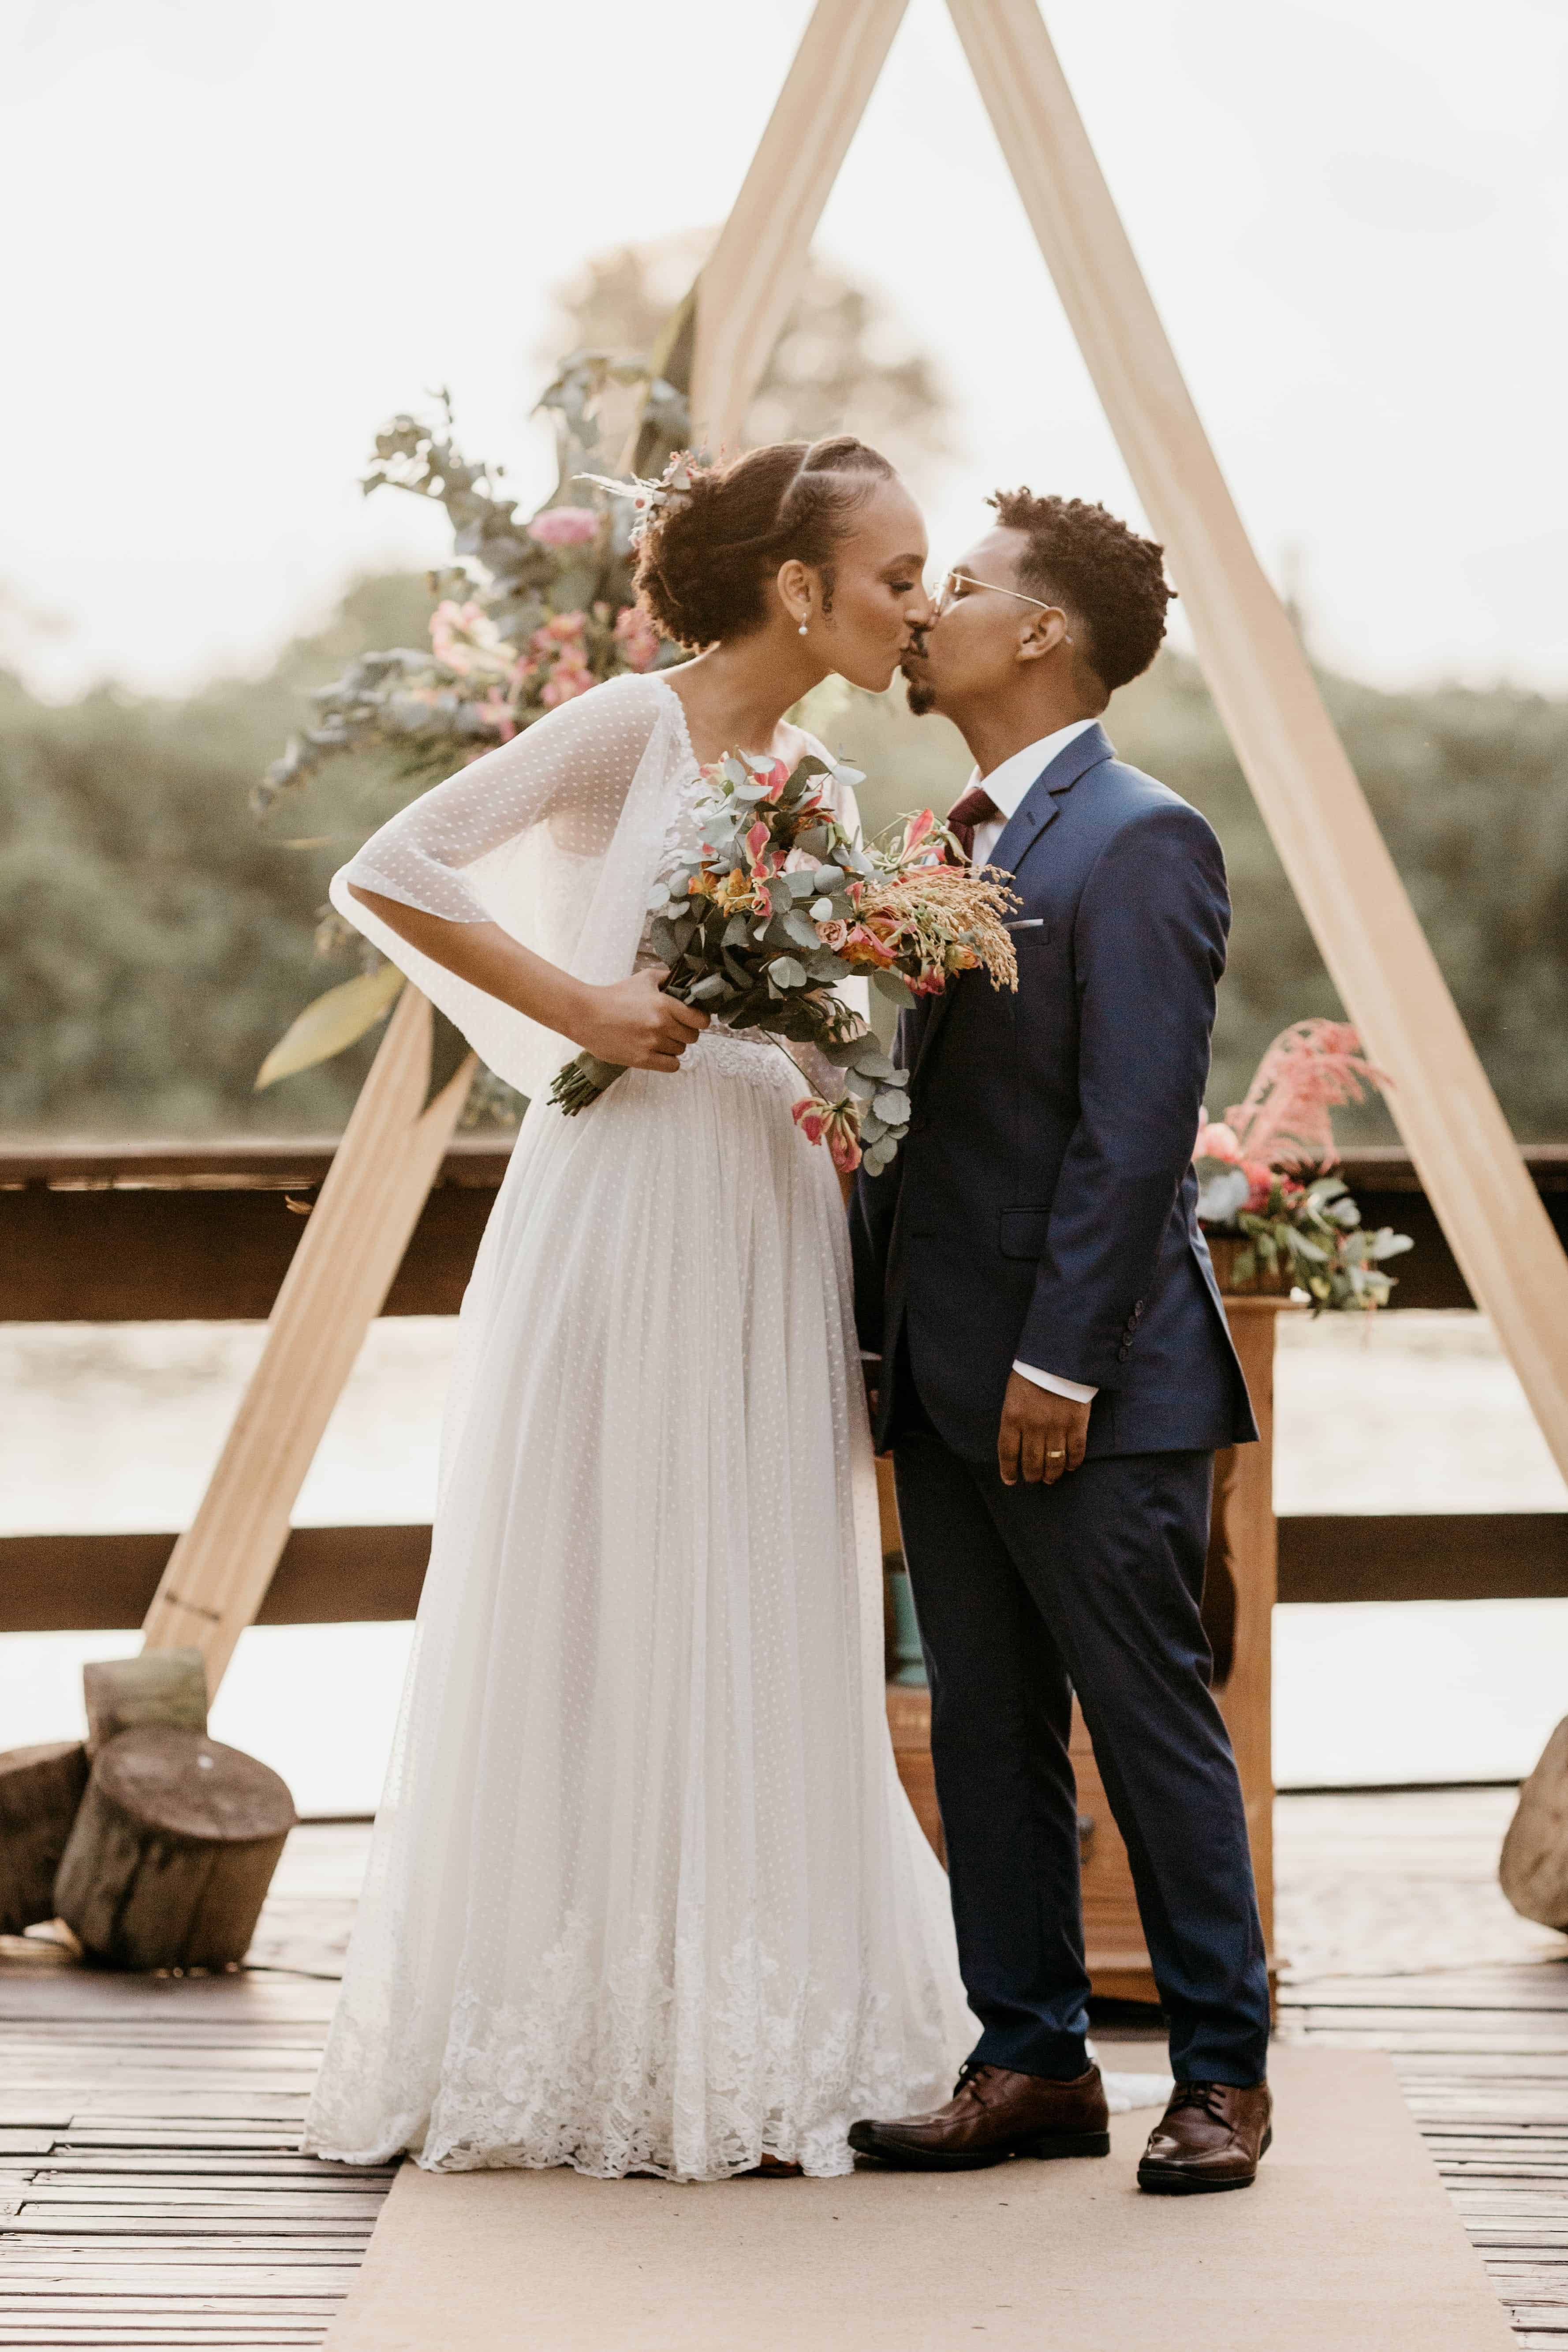 Free Diverse newlywed couple kissing on wooden terrace Stock Photo